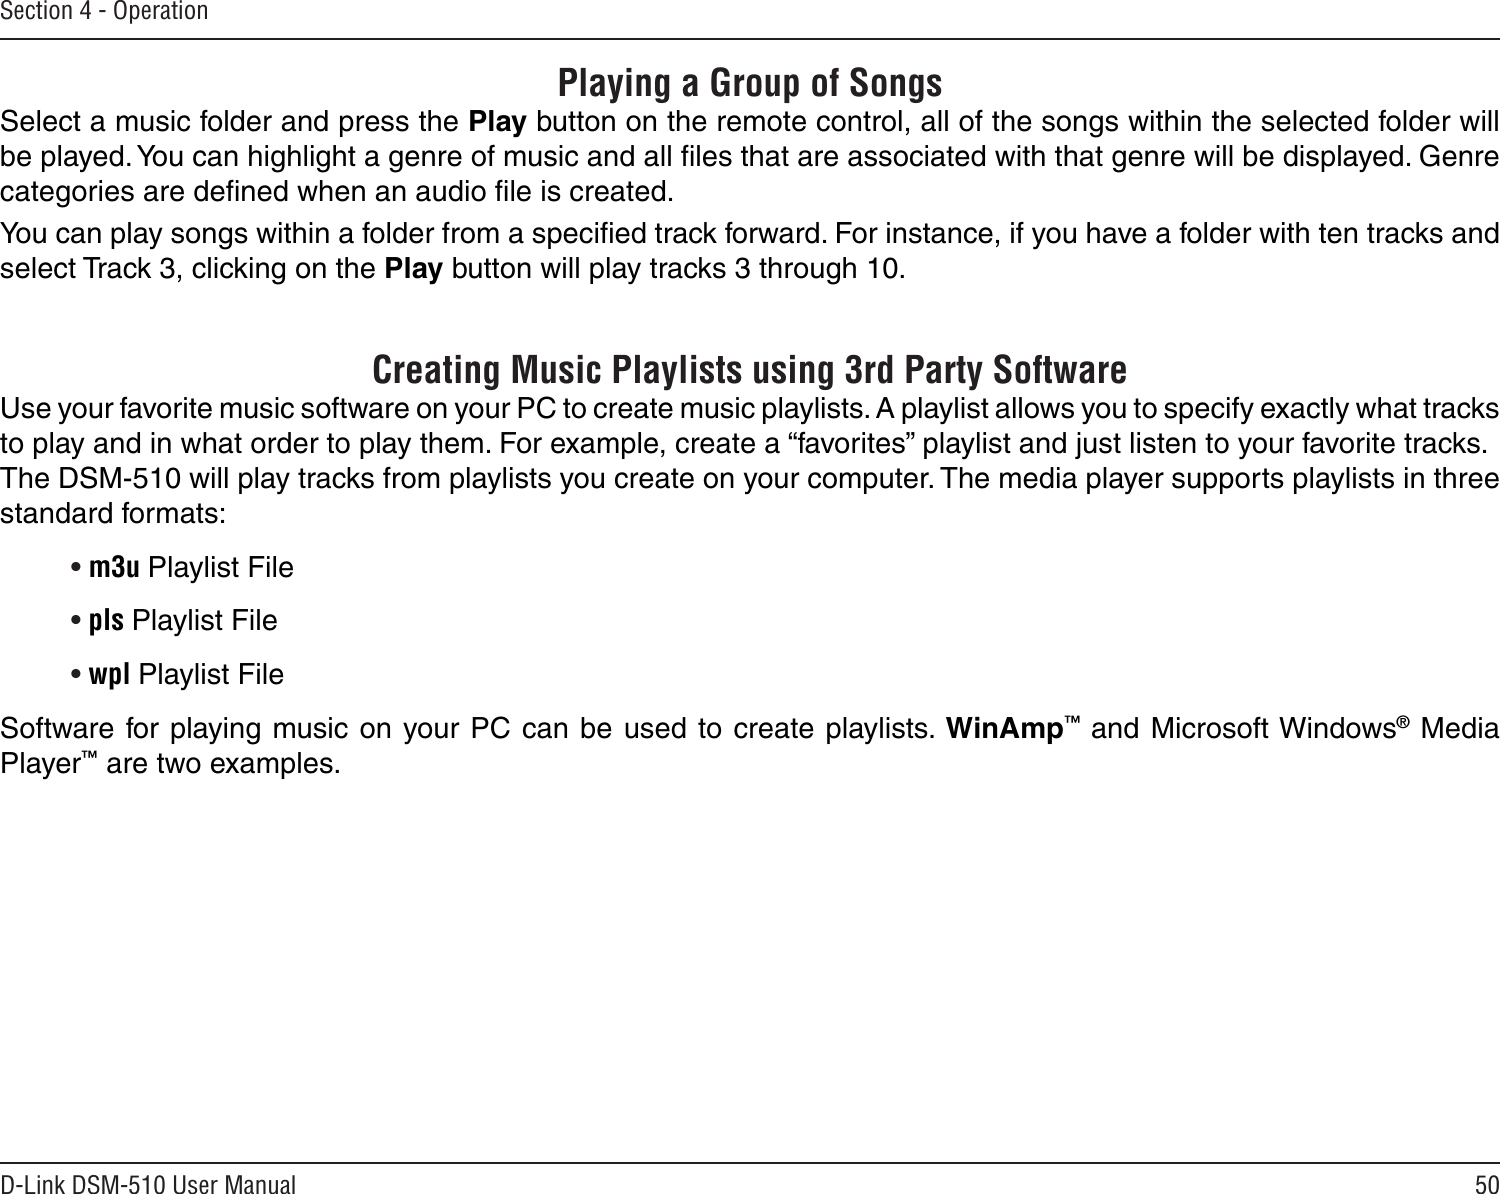 50D-Link DSM-510 User ManualSection 4 - OperationPlaying a Group of SongsSelect a music folder and press the Play button on the remote control, all of the songs within the selected folder will be played. You can highlight a genre of music and all ﬁles that are associated with that genre will be displayed. Genre categories are deﬁned when an audio ﬁle is created. You can play songs within a folder from a speciﬁed track forward. For instance, if you have a folder with ten tracks and select Track 3, clicking on the Play button will play tracks 3 through 10.       Creating Music Playlists using 3rd Party SoftwareUse your favorite music software on your PC to create music playlists. A playlist allows you to specify exactly what tracks to play and in what order to play them. For example, create a “favorites” playlist and just listen to your favorite tracks. The DSM-510 will play tracks from playlists you create on your computer. The media player supports playlists in three standard formats:• m3u Playlist File• pls Playlist File• wpl Playlist FileSoftware for playing music on your PC can be used to create playlists. WinAmp™ and Microsoft Windows® Media Player™ are two examples.